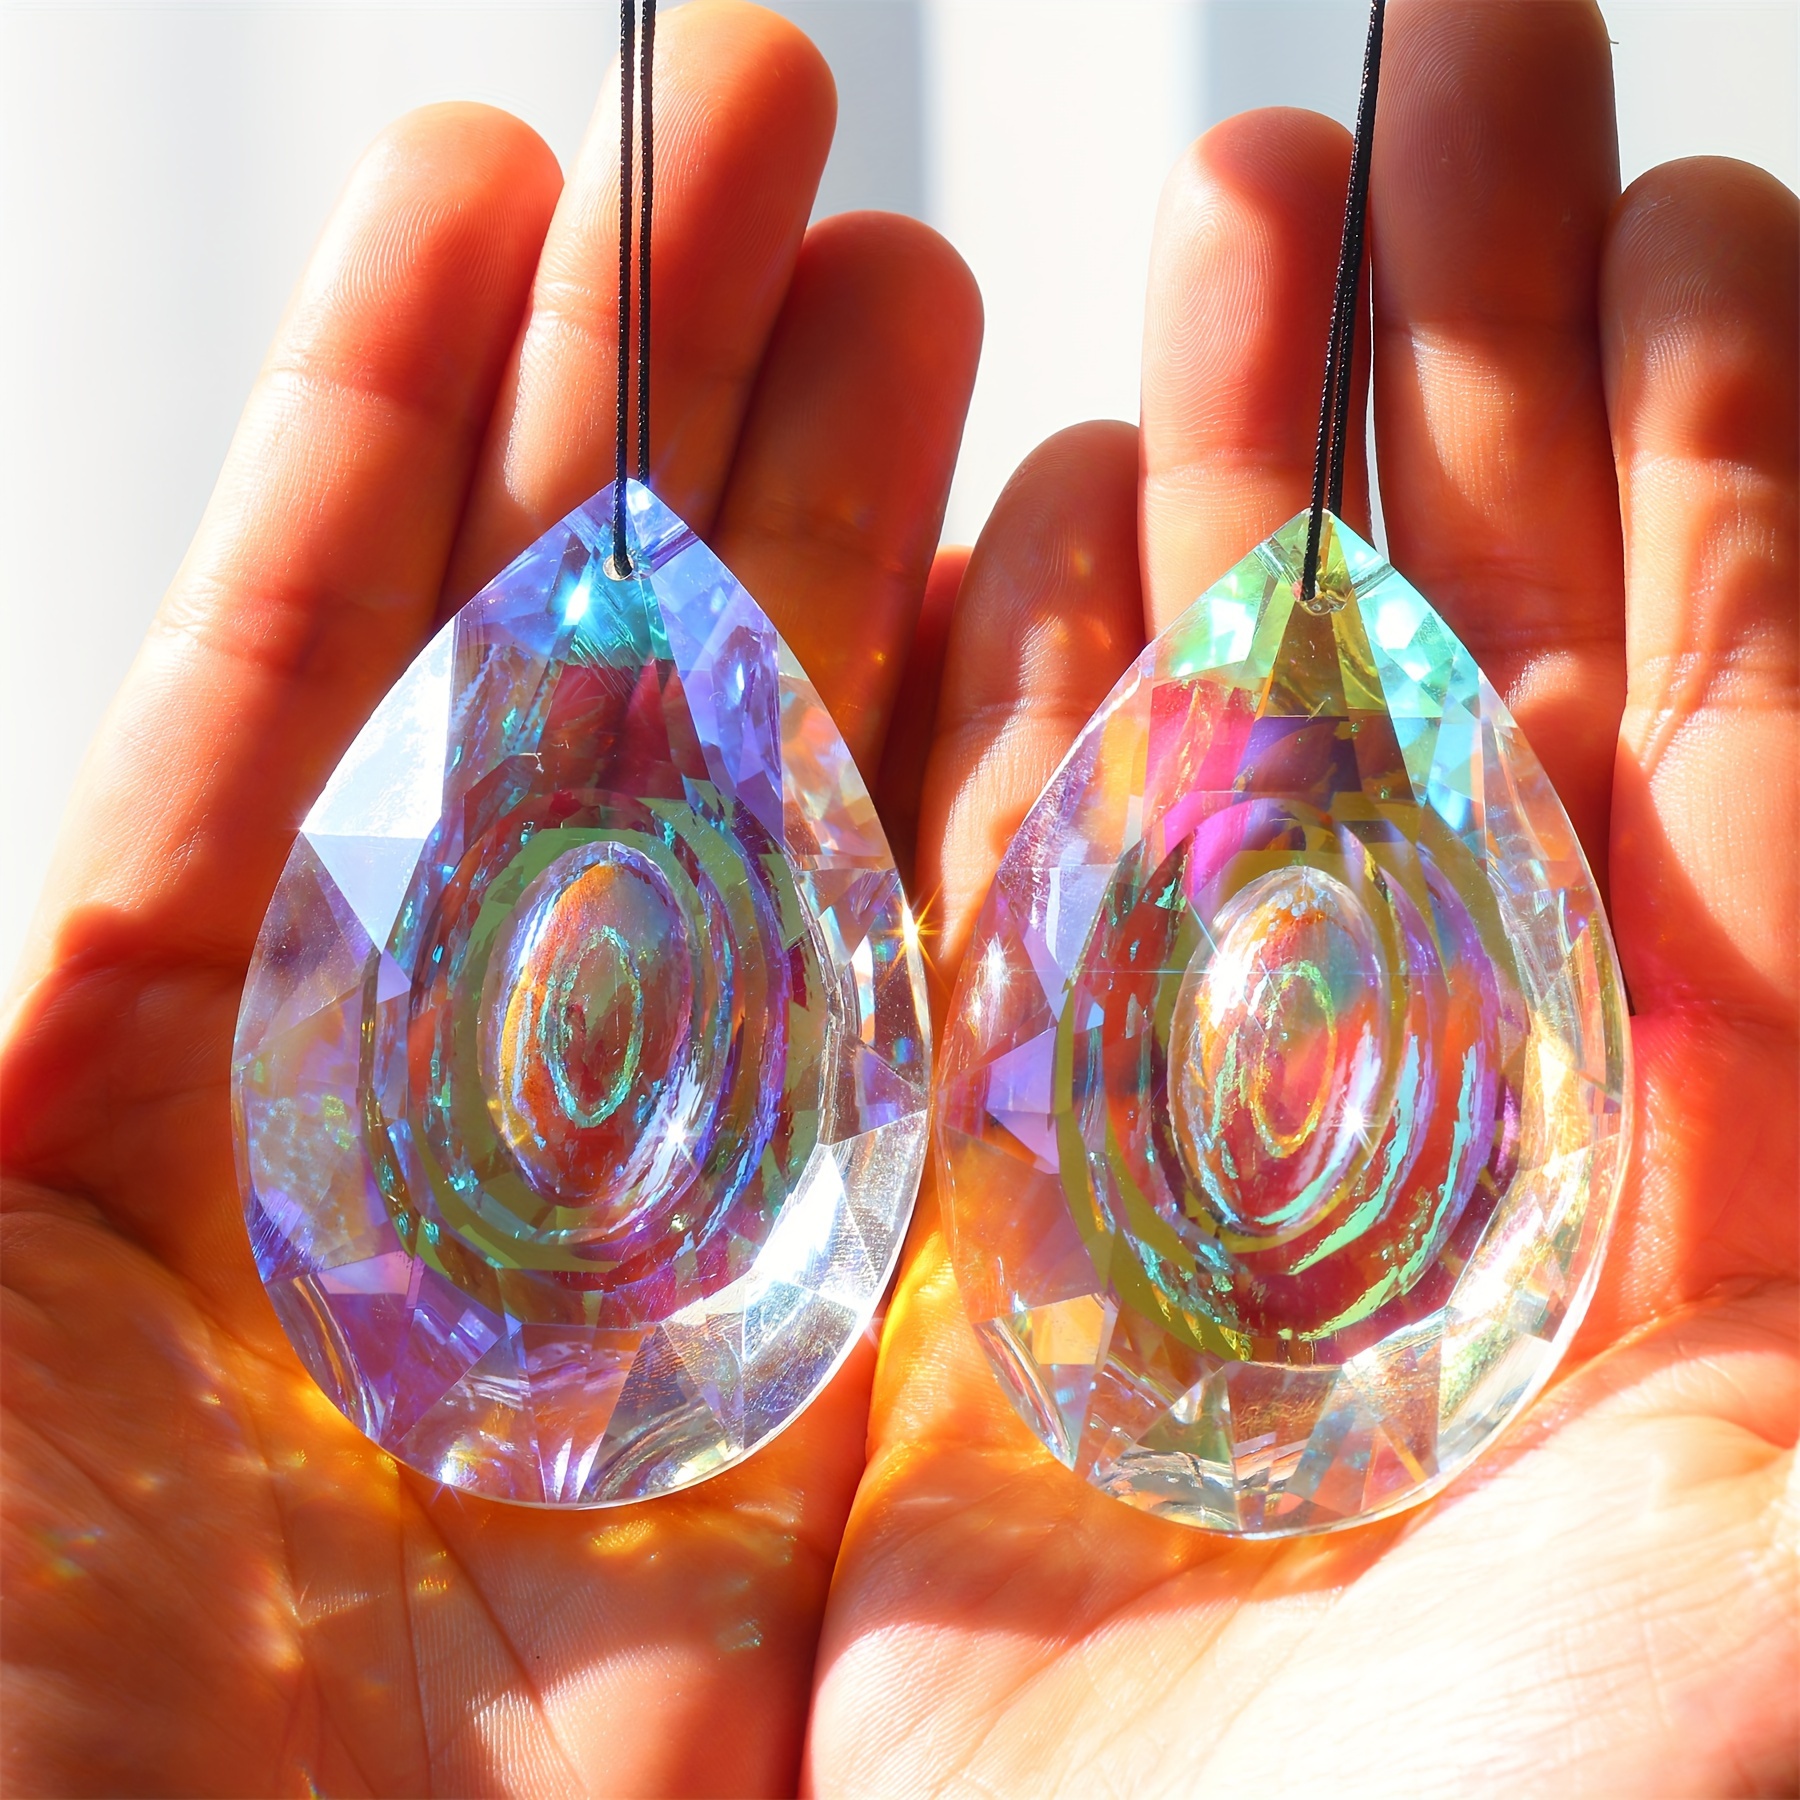 

sparkling" 2-piece Crystal Dragon Eye Sun Catchers - Large Teardrop Prism Pendants For Rainbow Effect, Perfect For Home & Garden Window Wall Decor